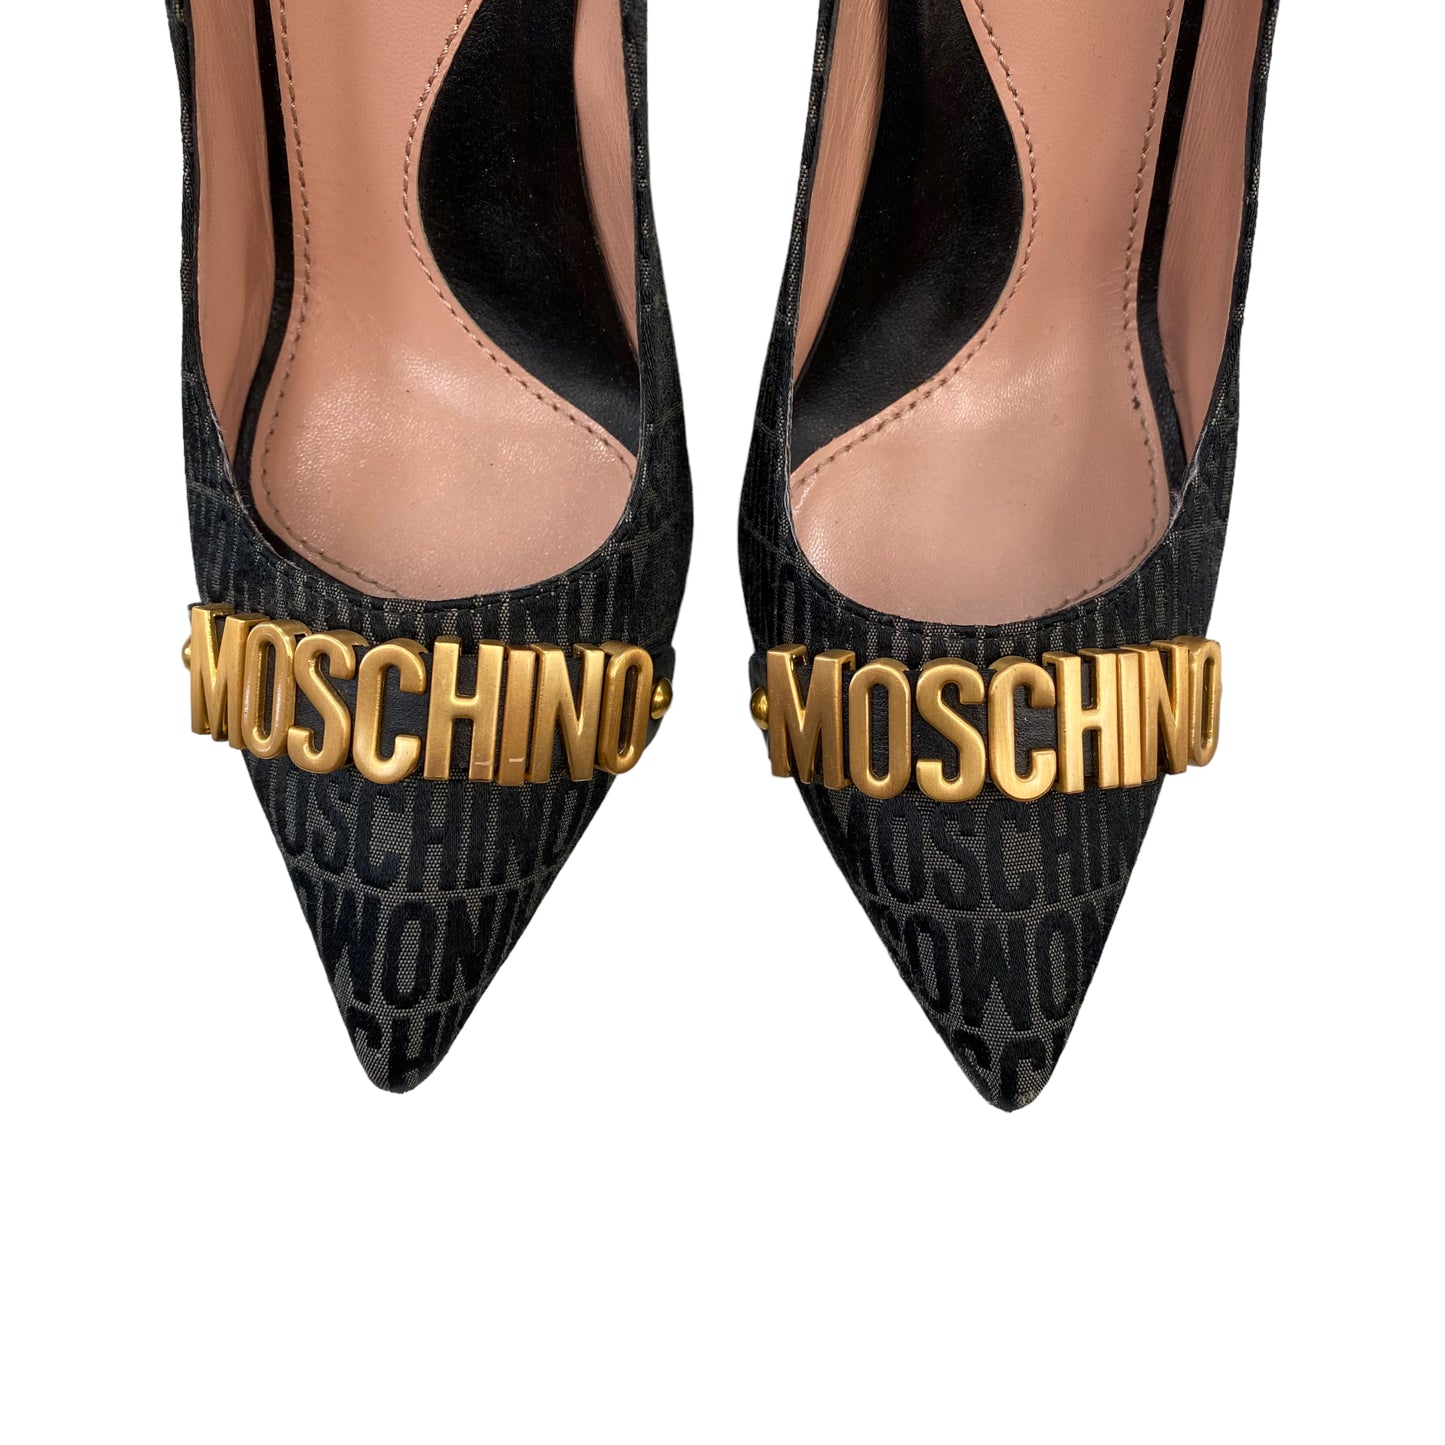 Shoes Luxury Designer By Moschino  Size: 7.5